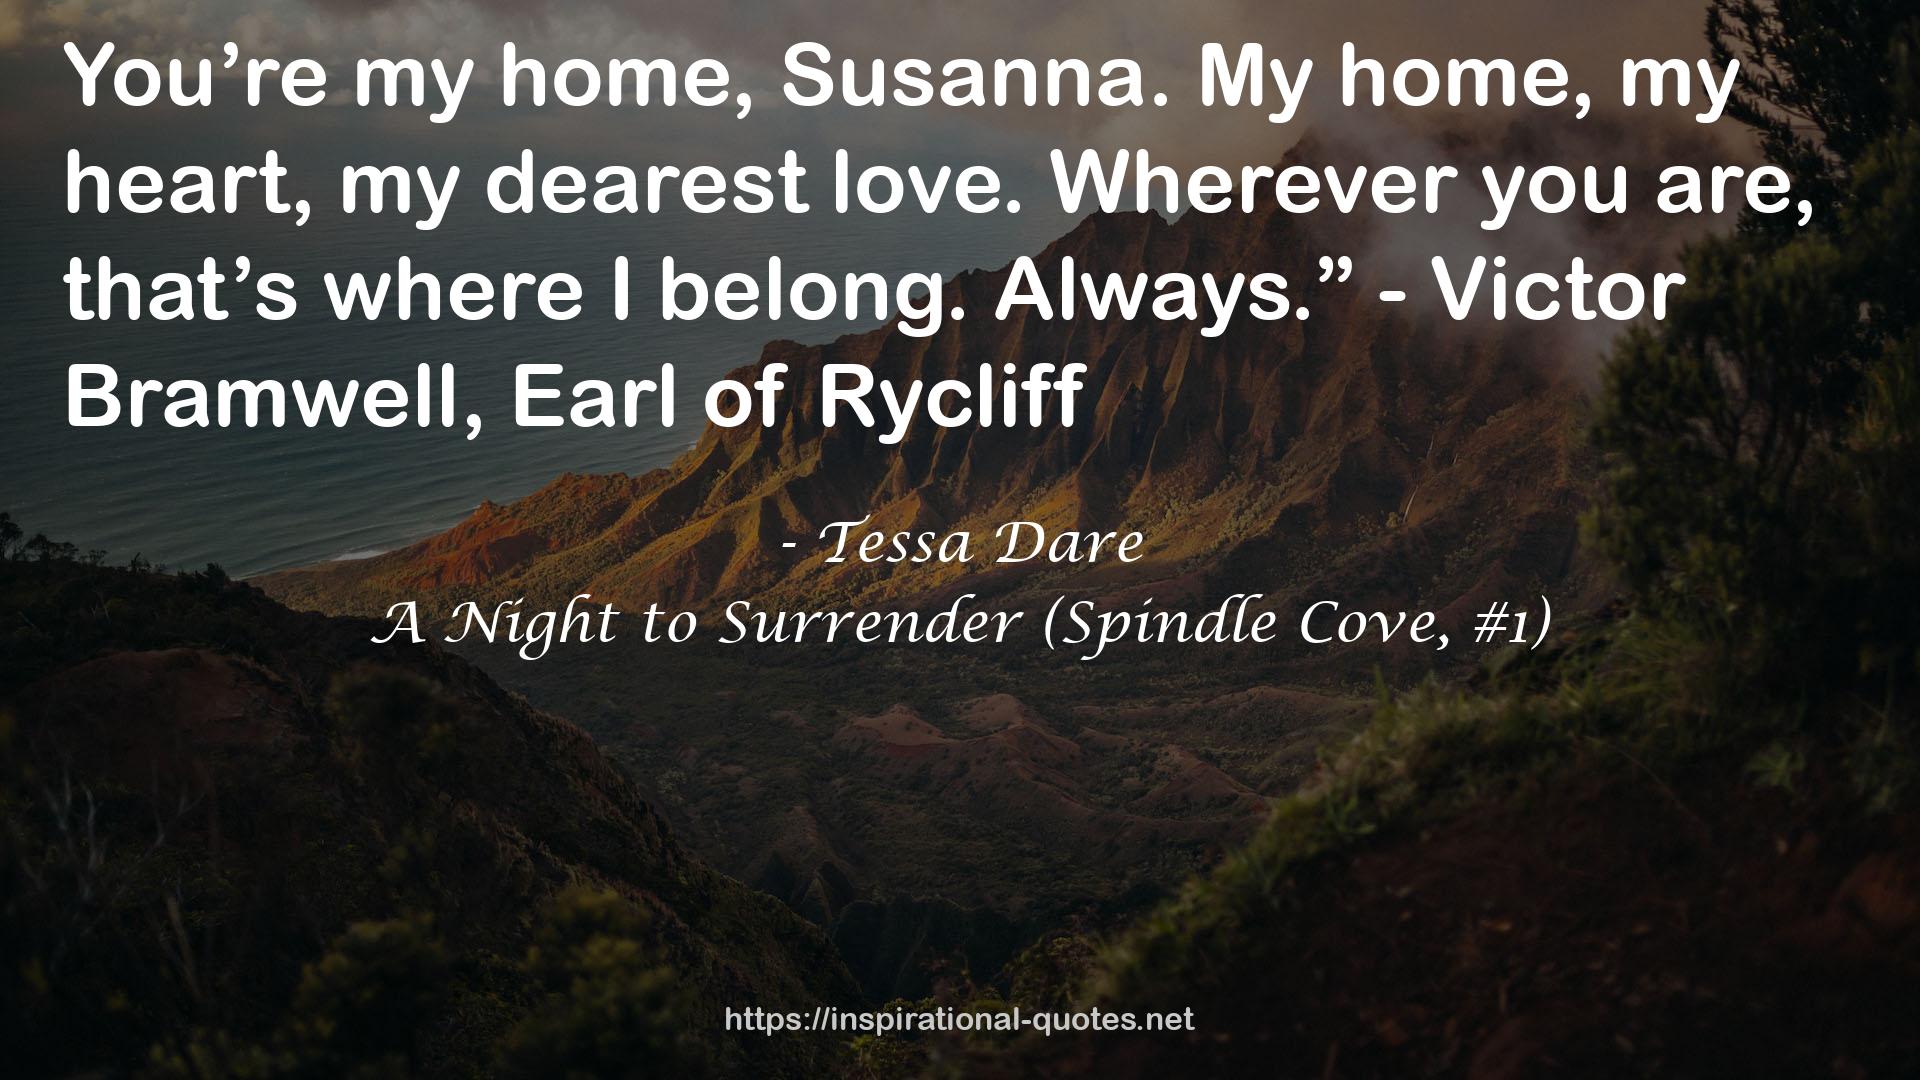 A Night to Surrender (Spindle Cove, #1) QUOTES